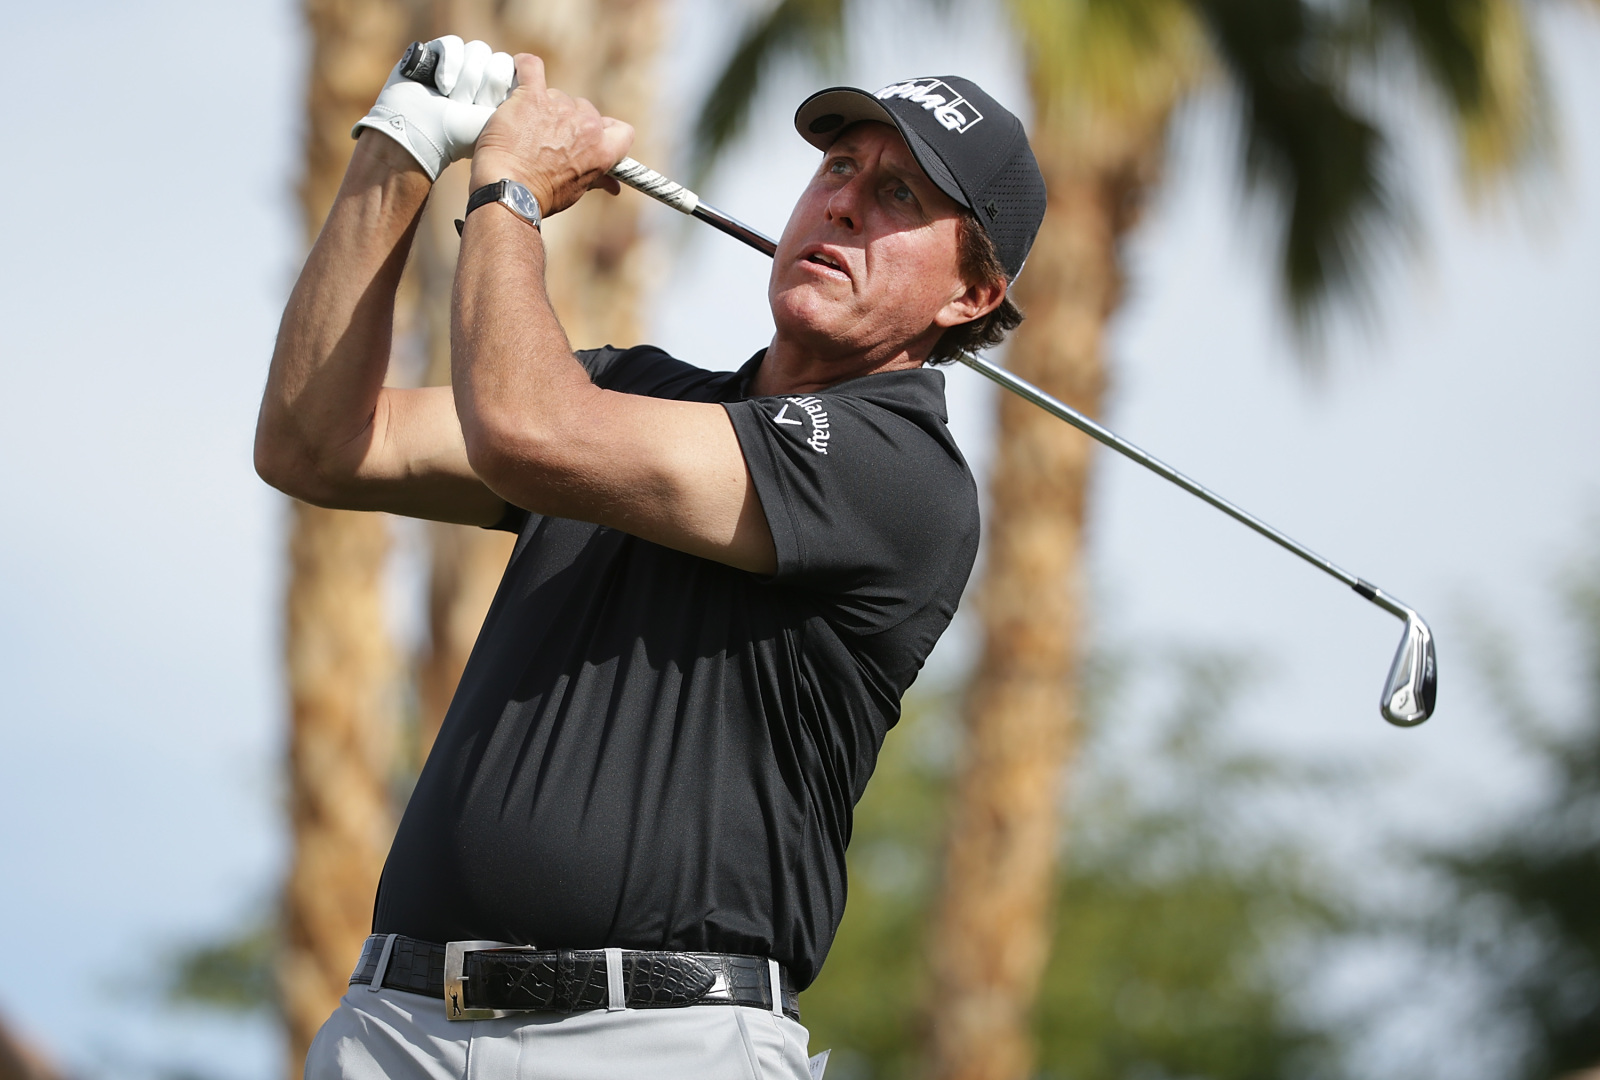 Phil Mickelson enters PGA Championship, US Open and first LIV Golf event